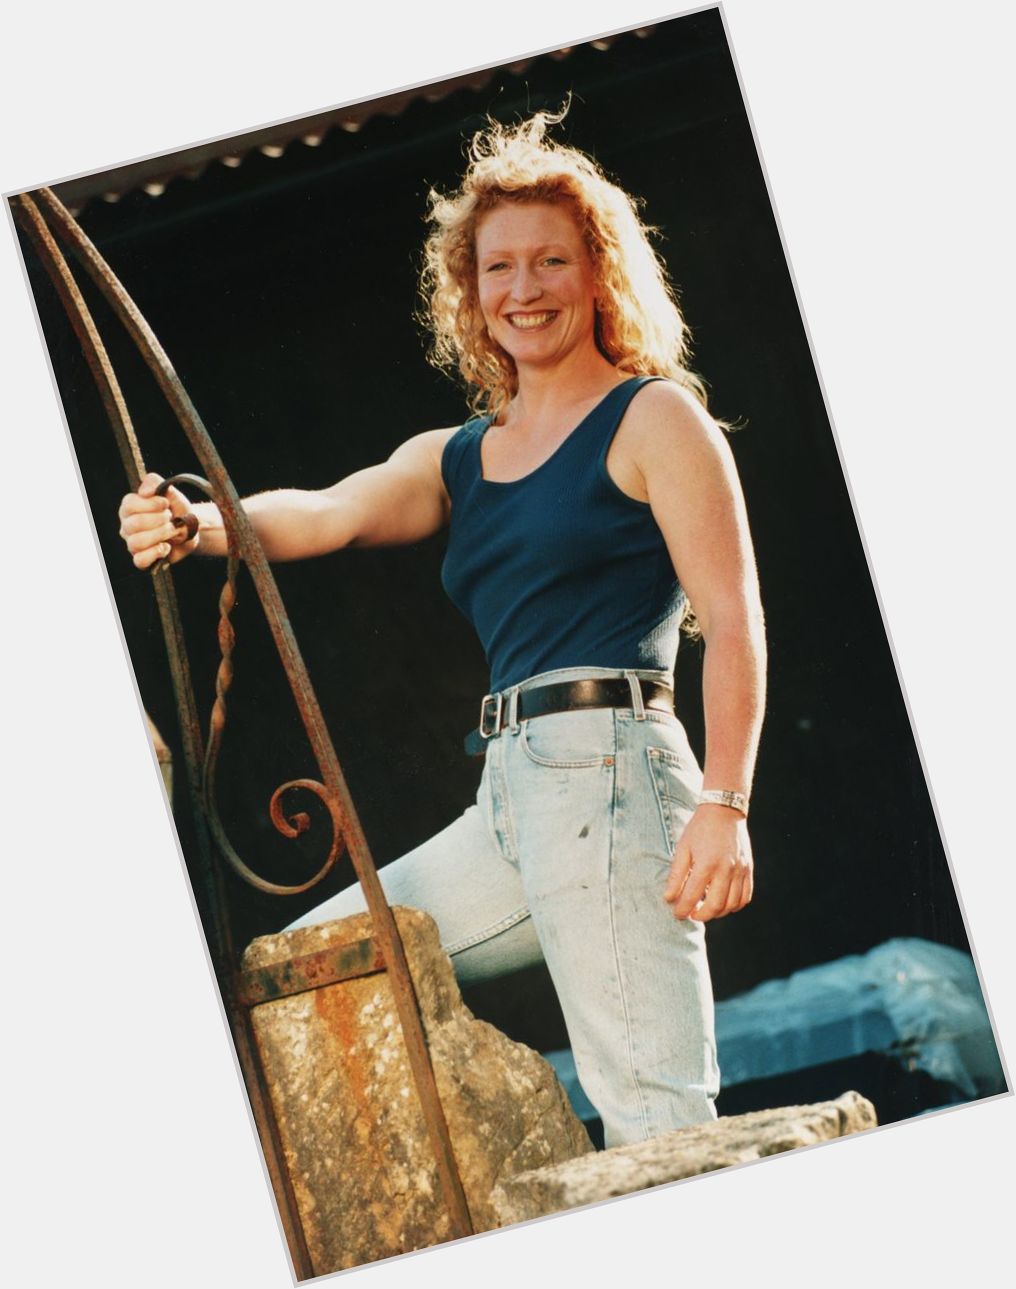 <a href="/hot-women/charlie-dimmock/where-dating-news-photos">Charlie Dimmock</a>  